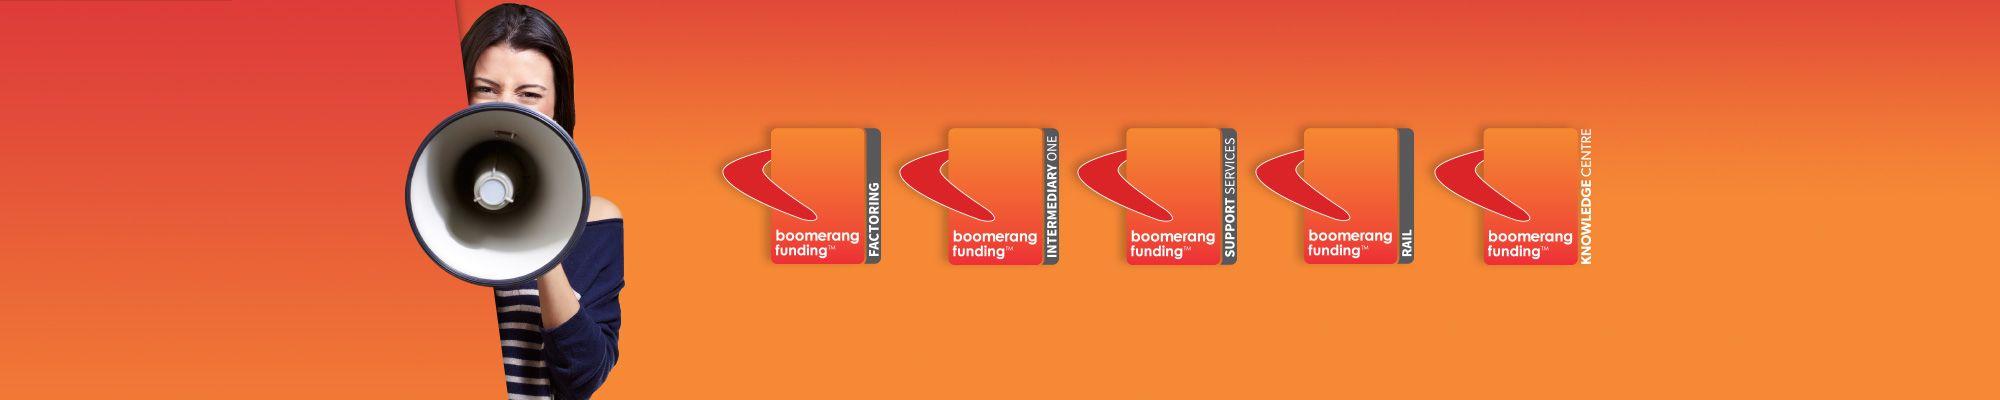 Boomerang UK Logo - Risk Free Funding for Contractors and Temporary Workers